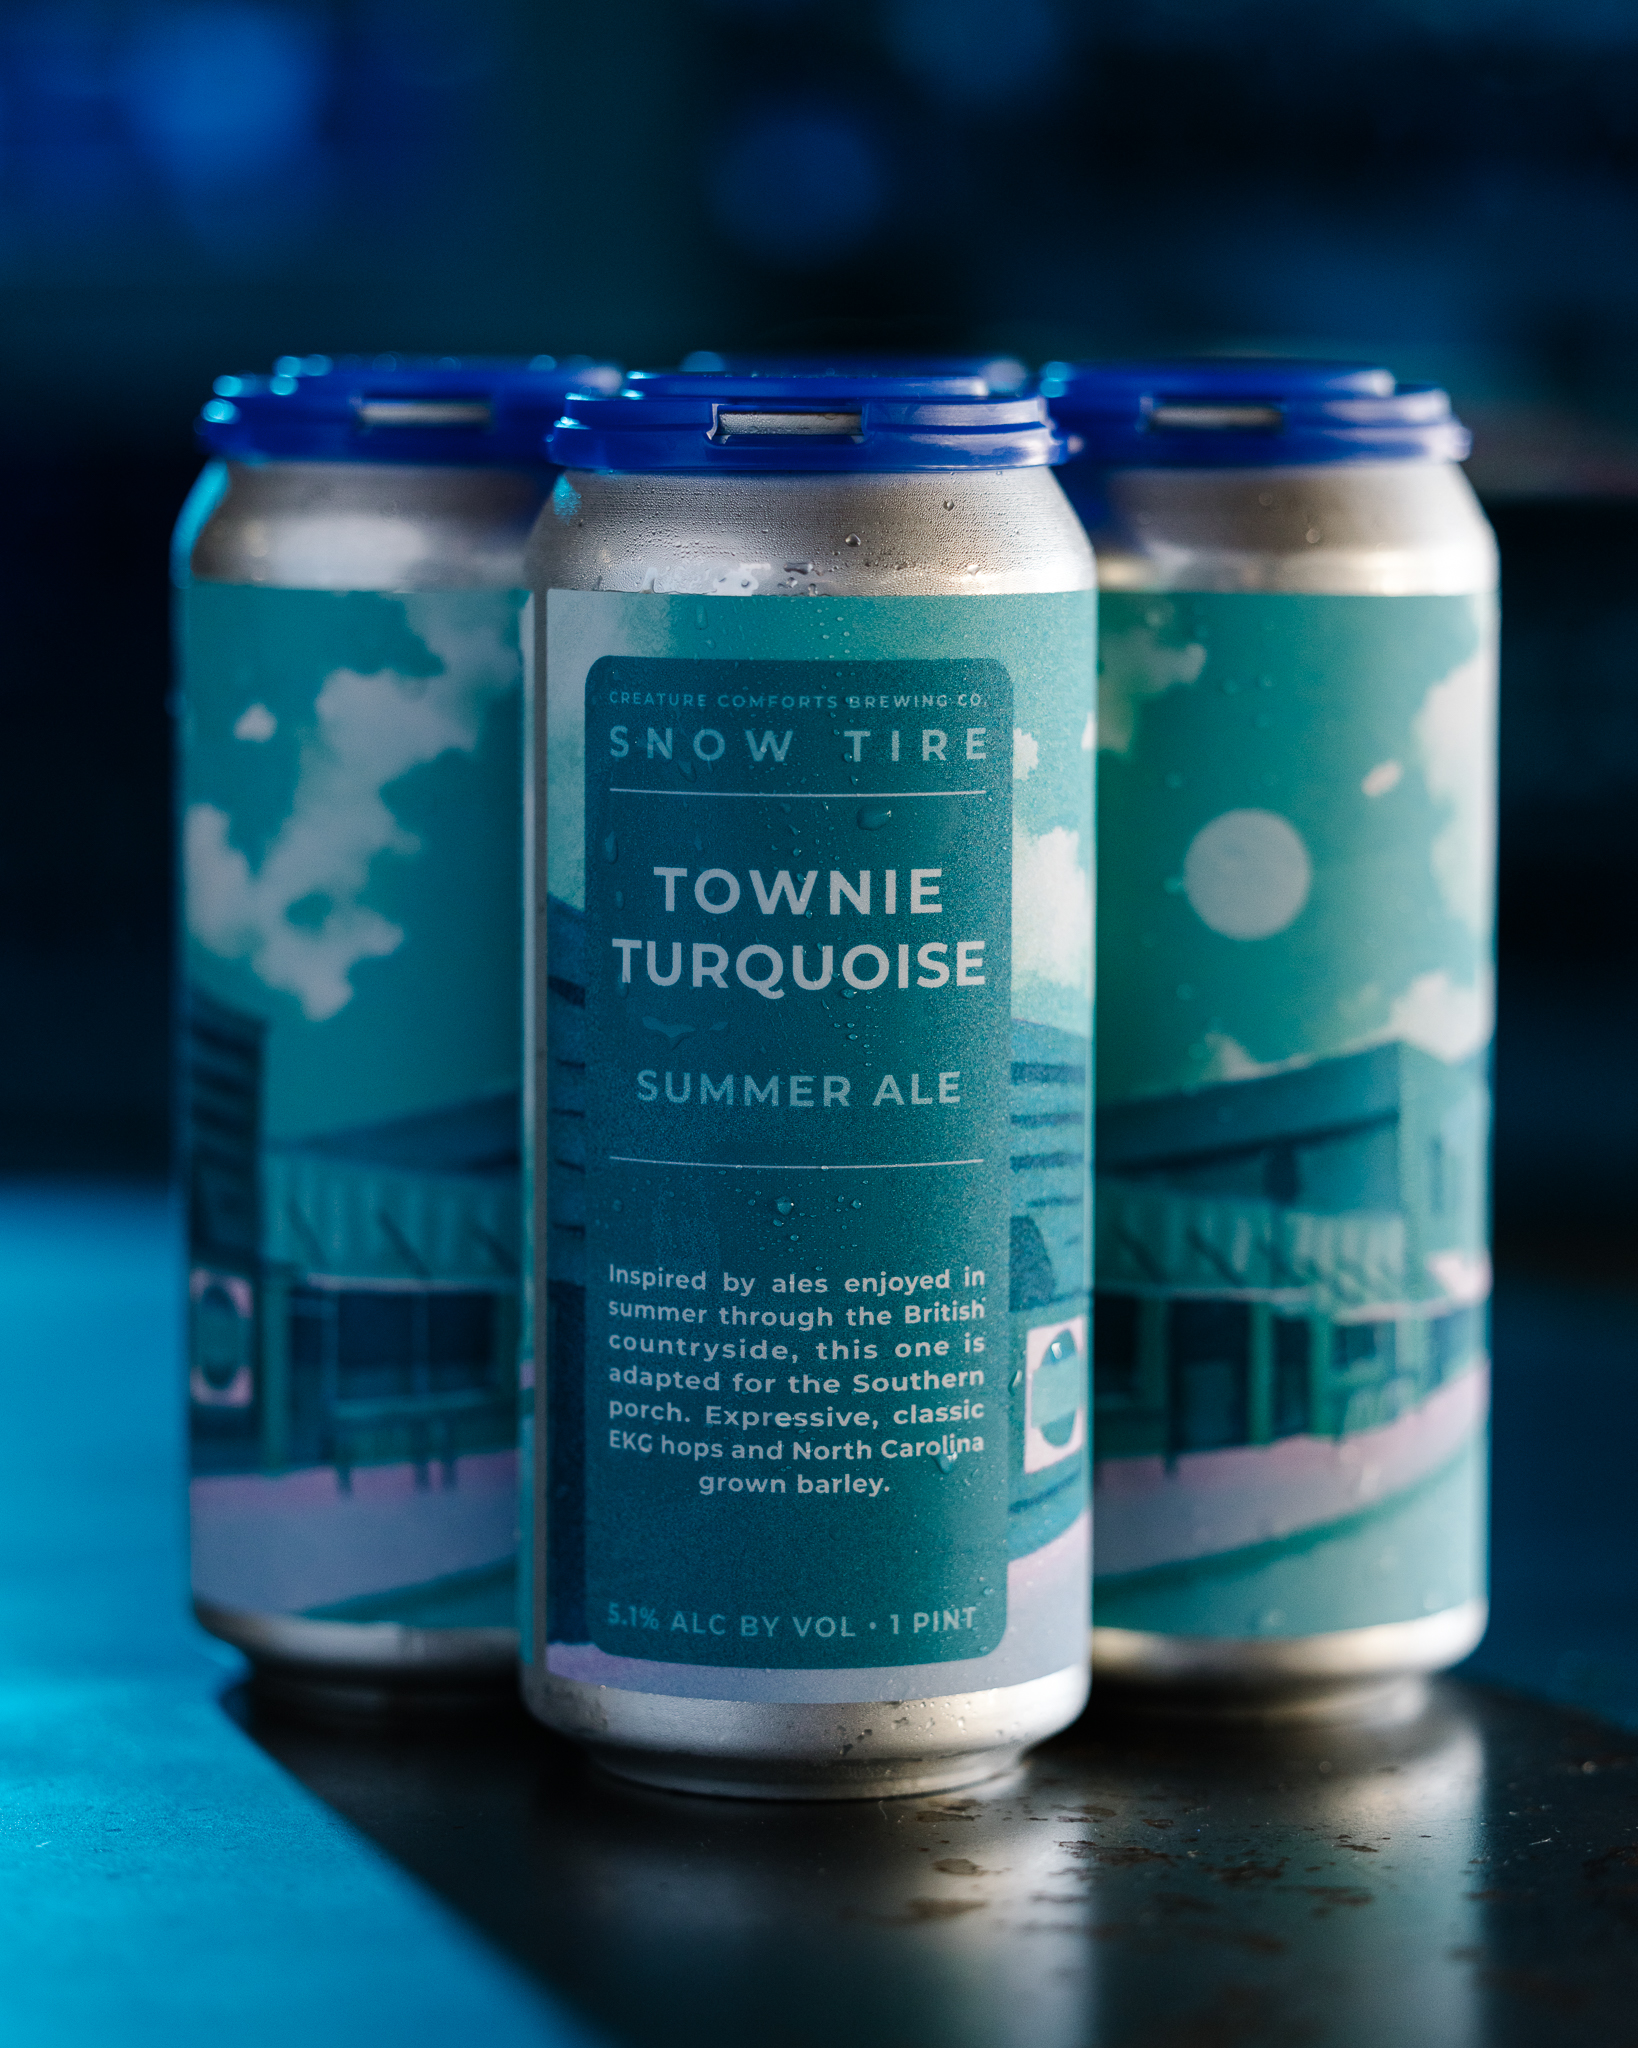 Townie Turquoise